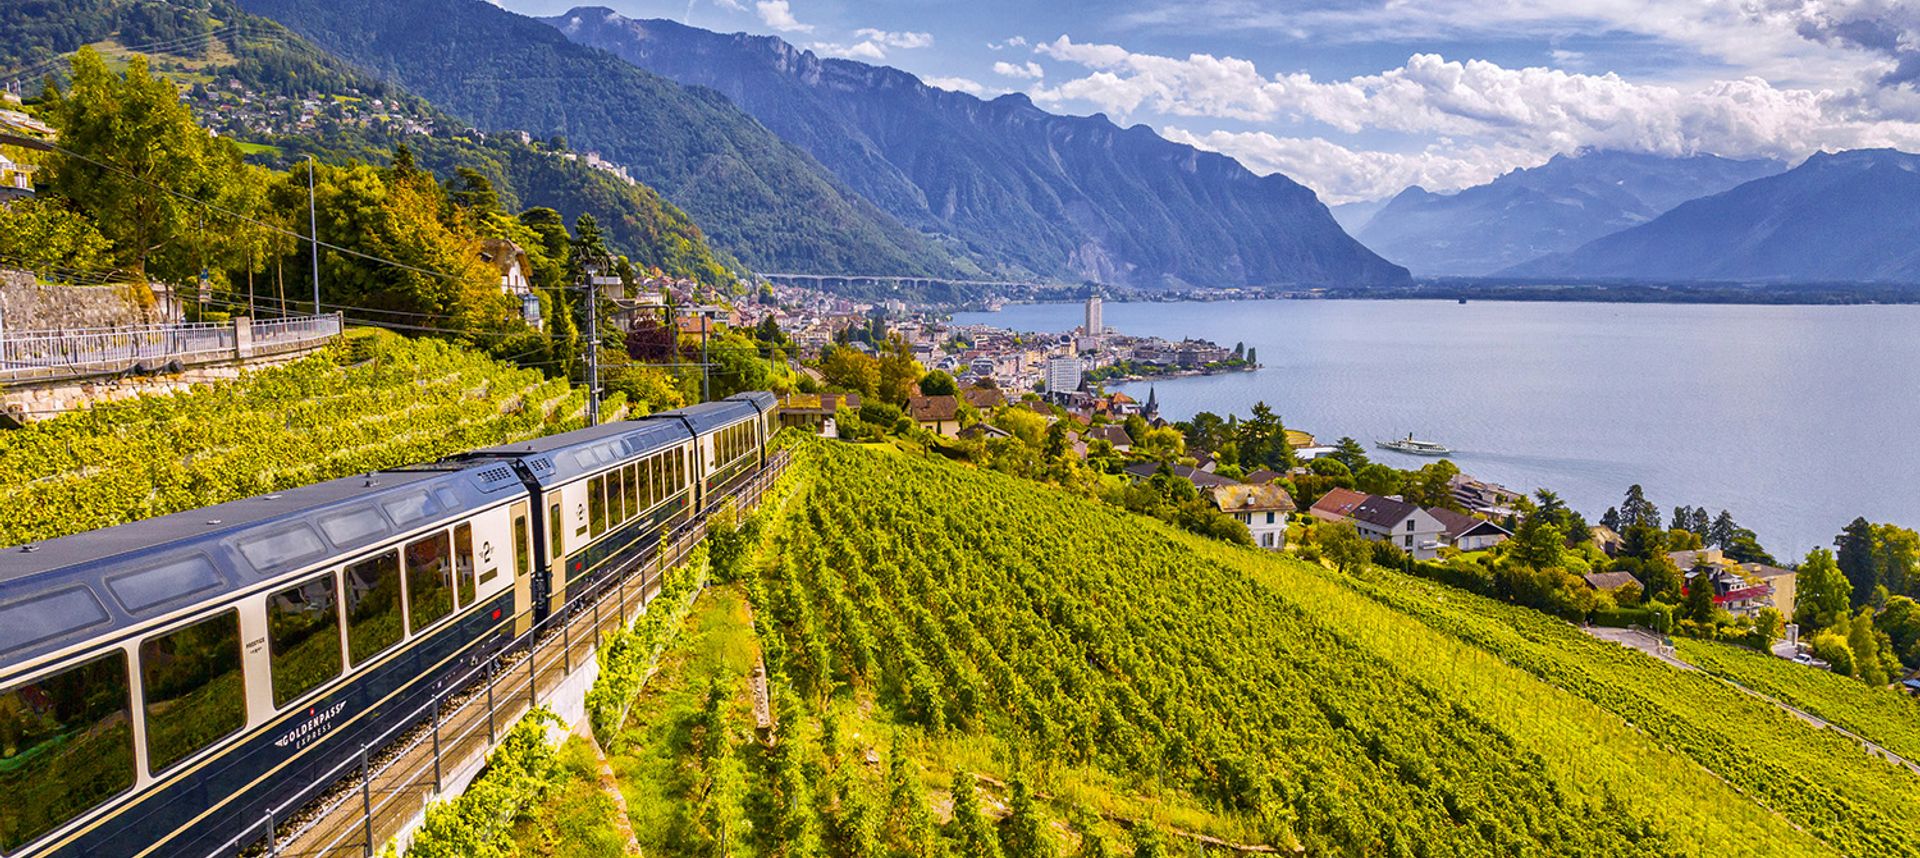 13 of Europe's most exciting new rail journeys for 2023